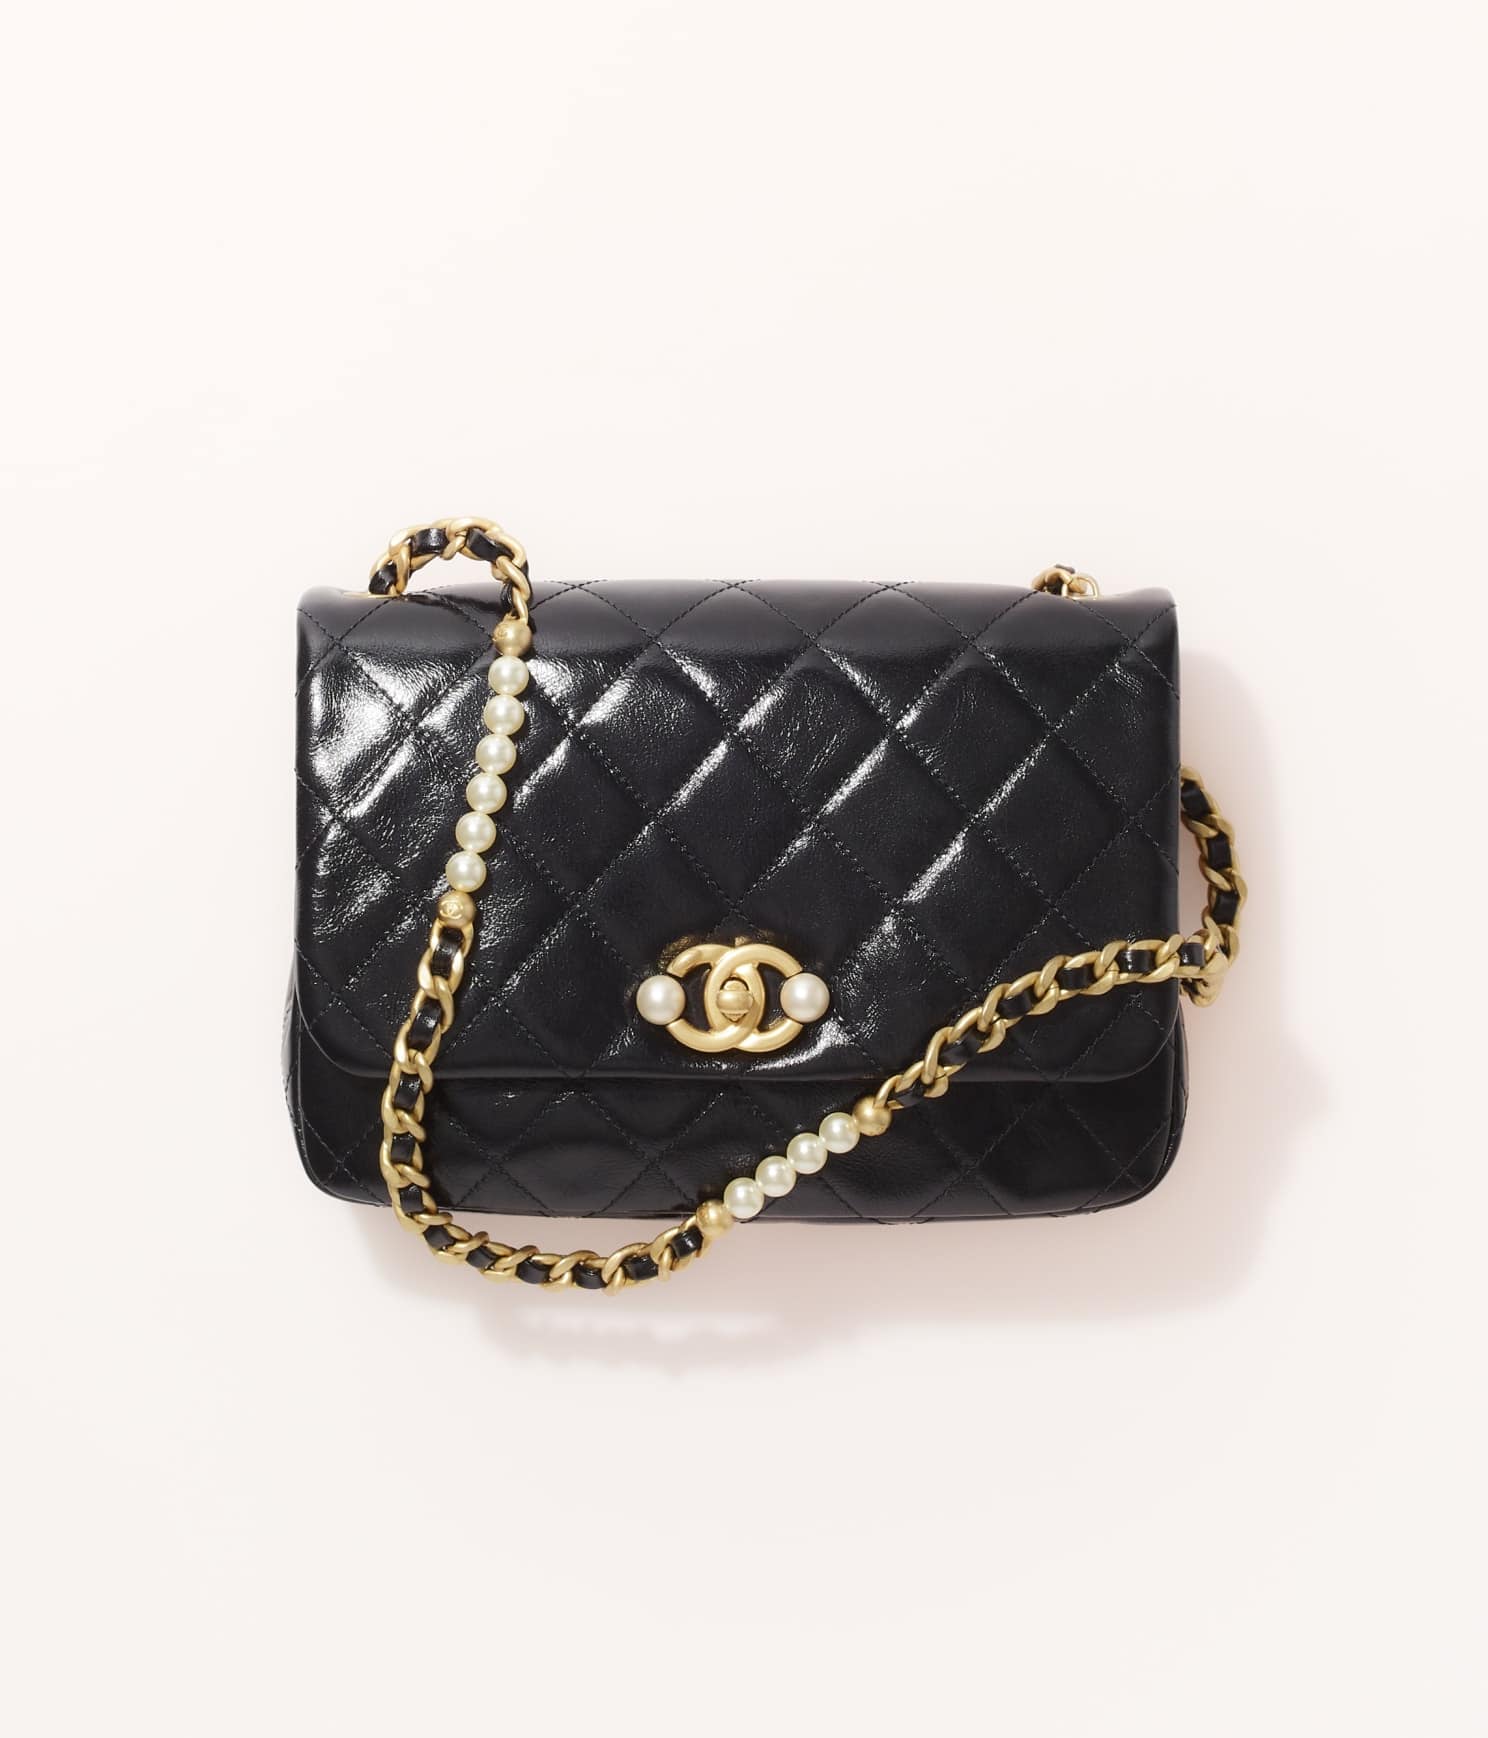 Thoughts about this bag I want a classic bag but since the price is too  high right now and this bag is similar to a classic so Im thinking about  getting this